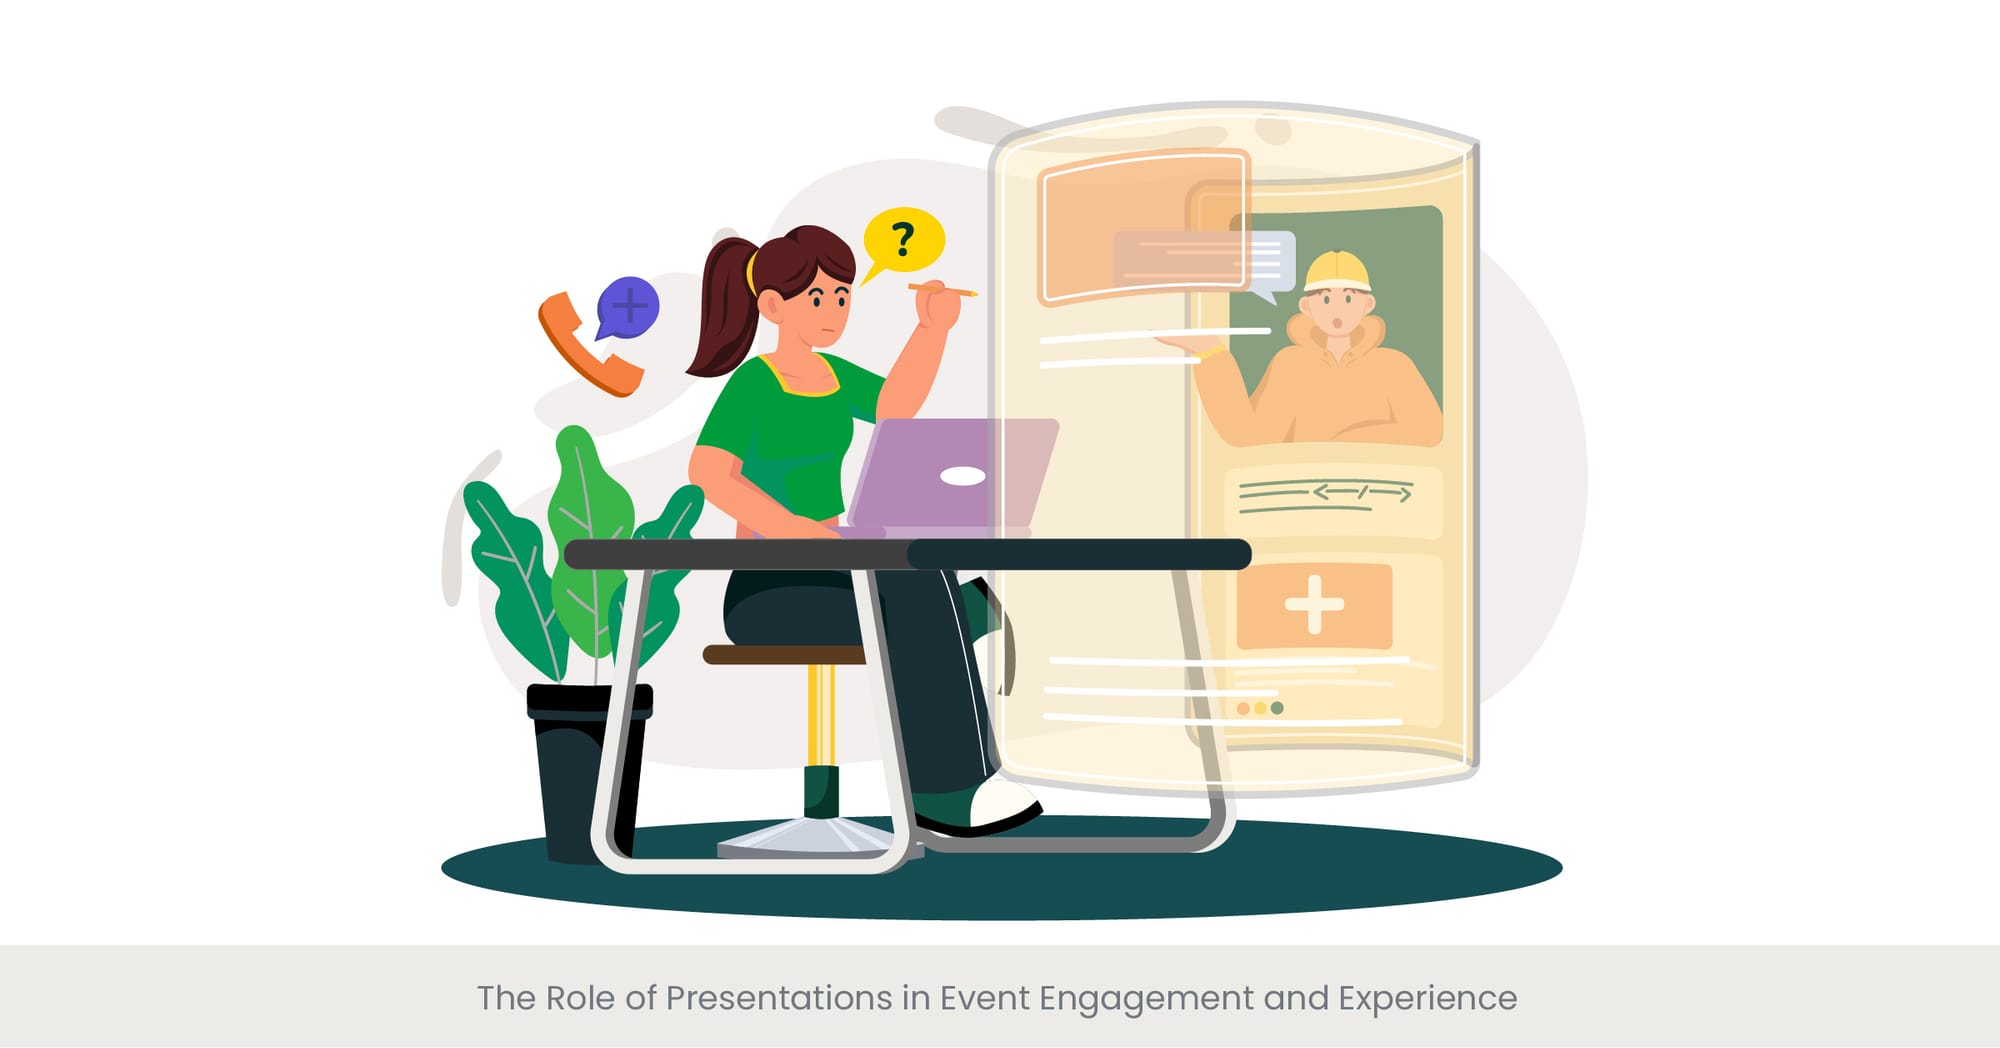 The Role of Presentations in Event Engagement and Experience